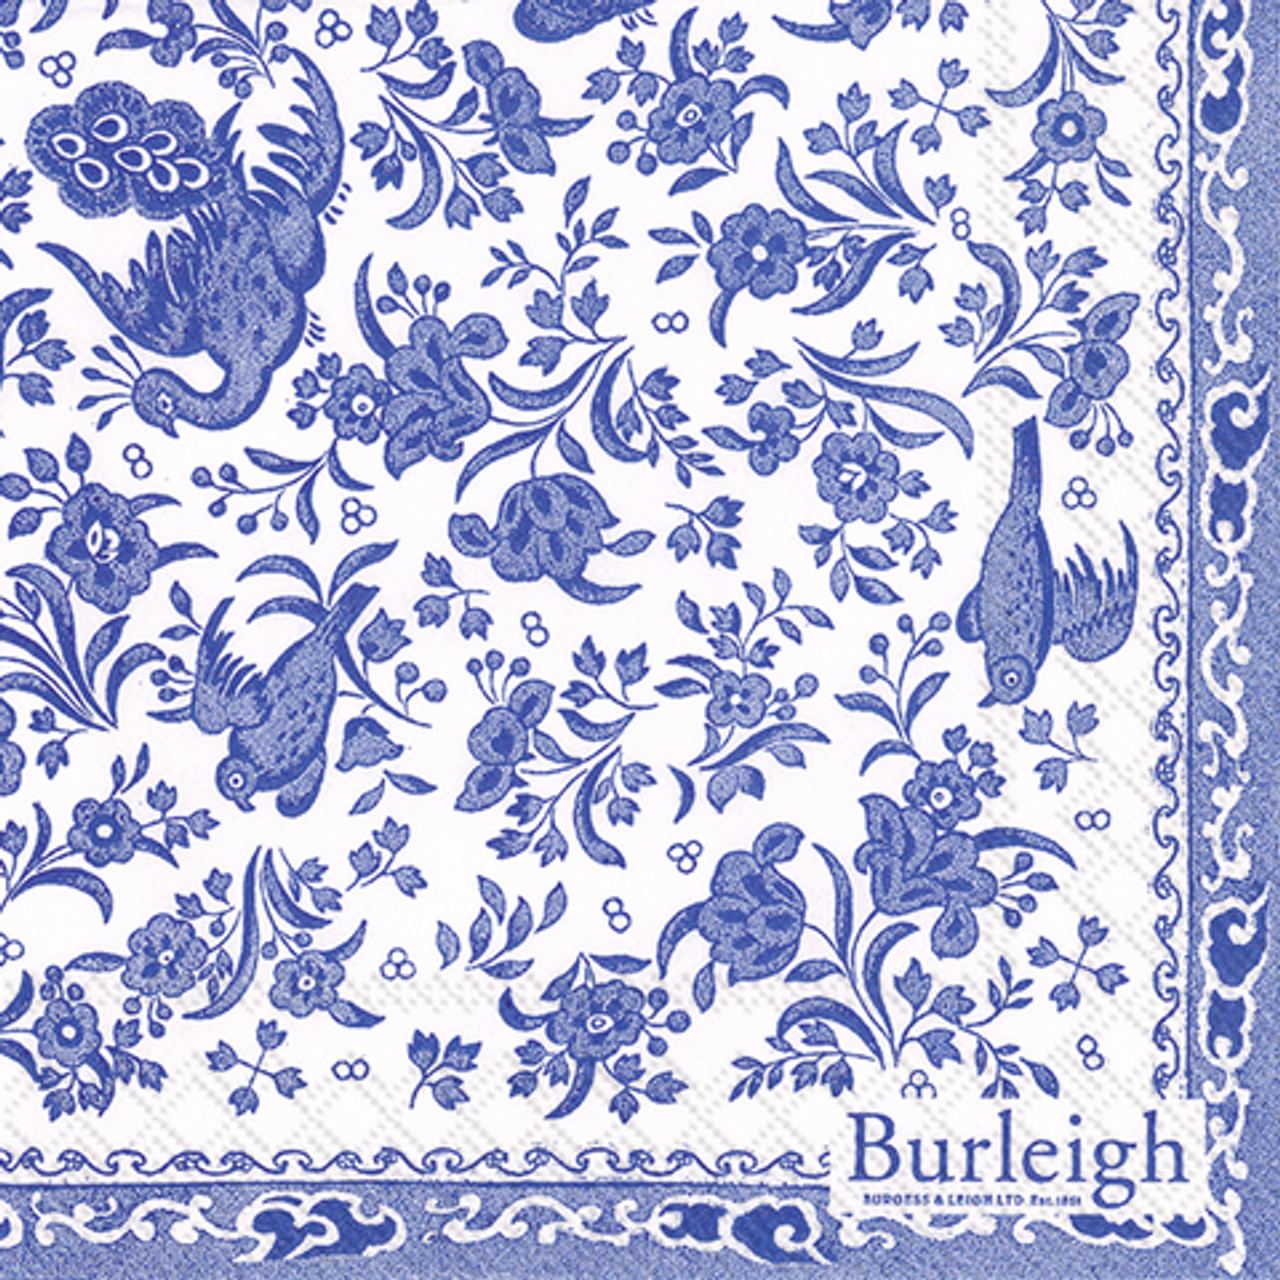 Paper Napkins - Burleigh Regal Peacock - Luncheon Size 20 Pack